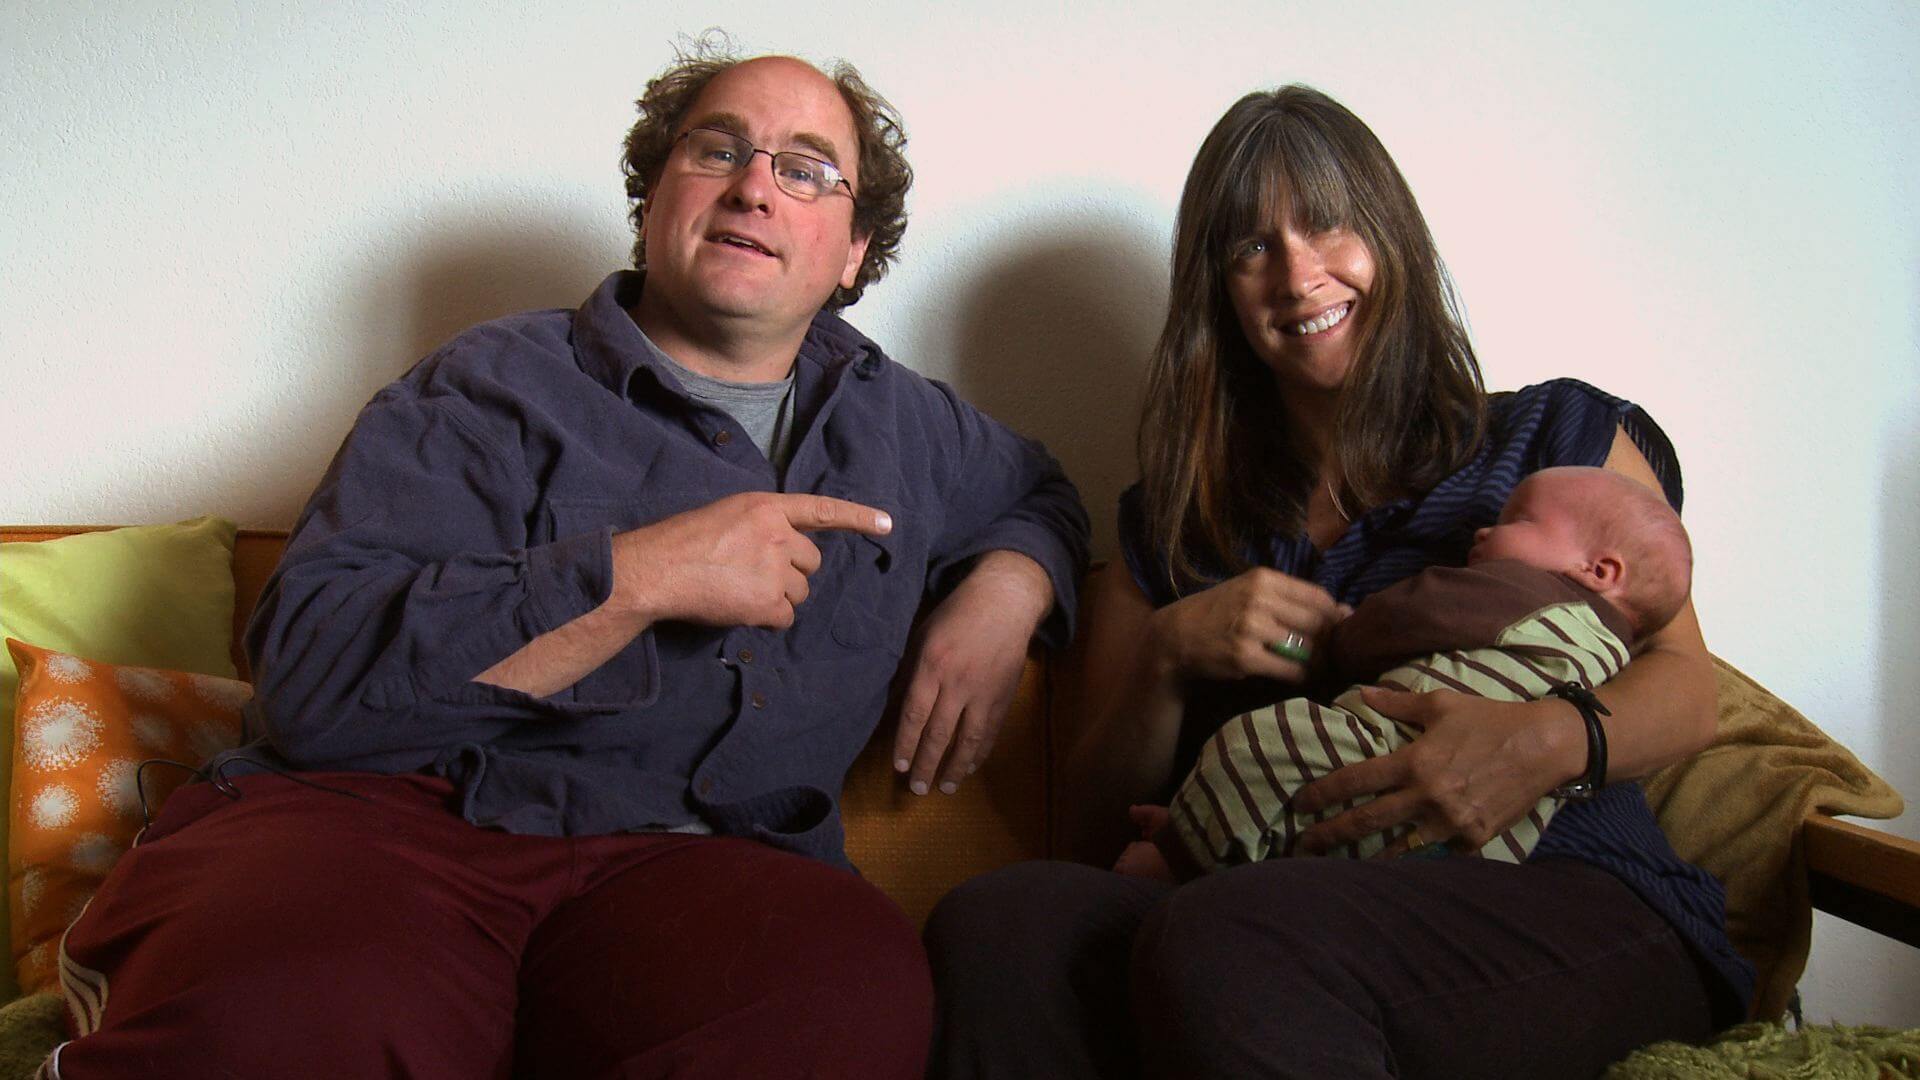 Still from Bag It. A couple is sitting on a couch. The man points at the woman. The woman is feeding a baby in her arms.